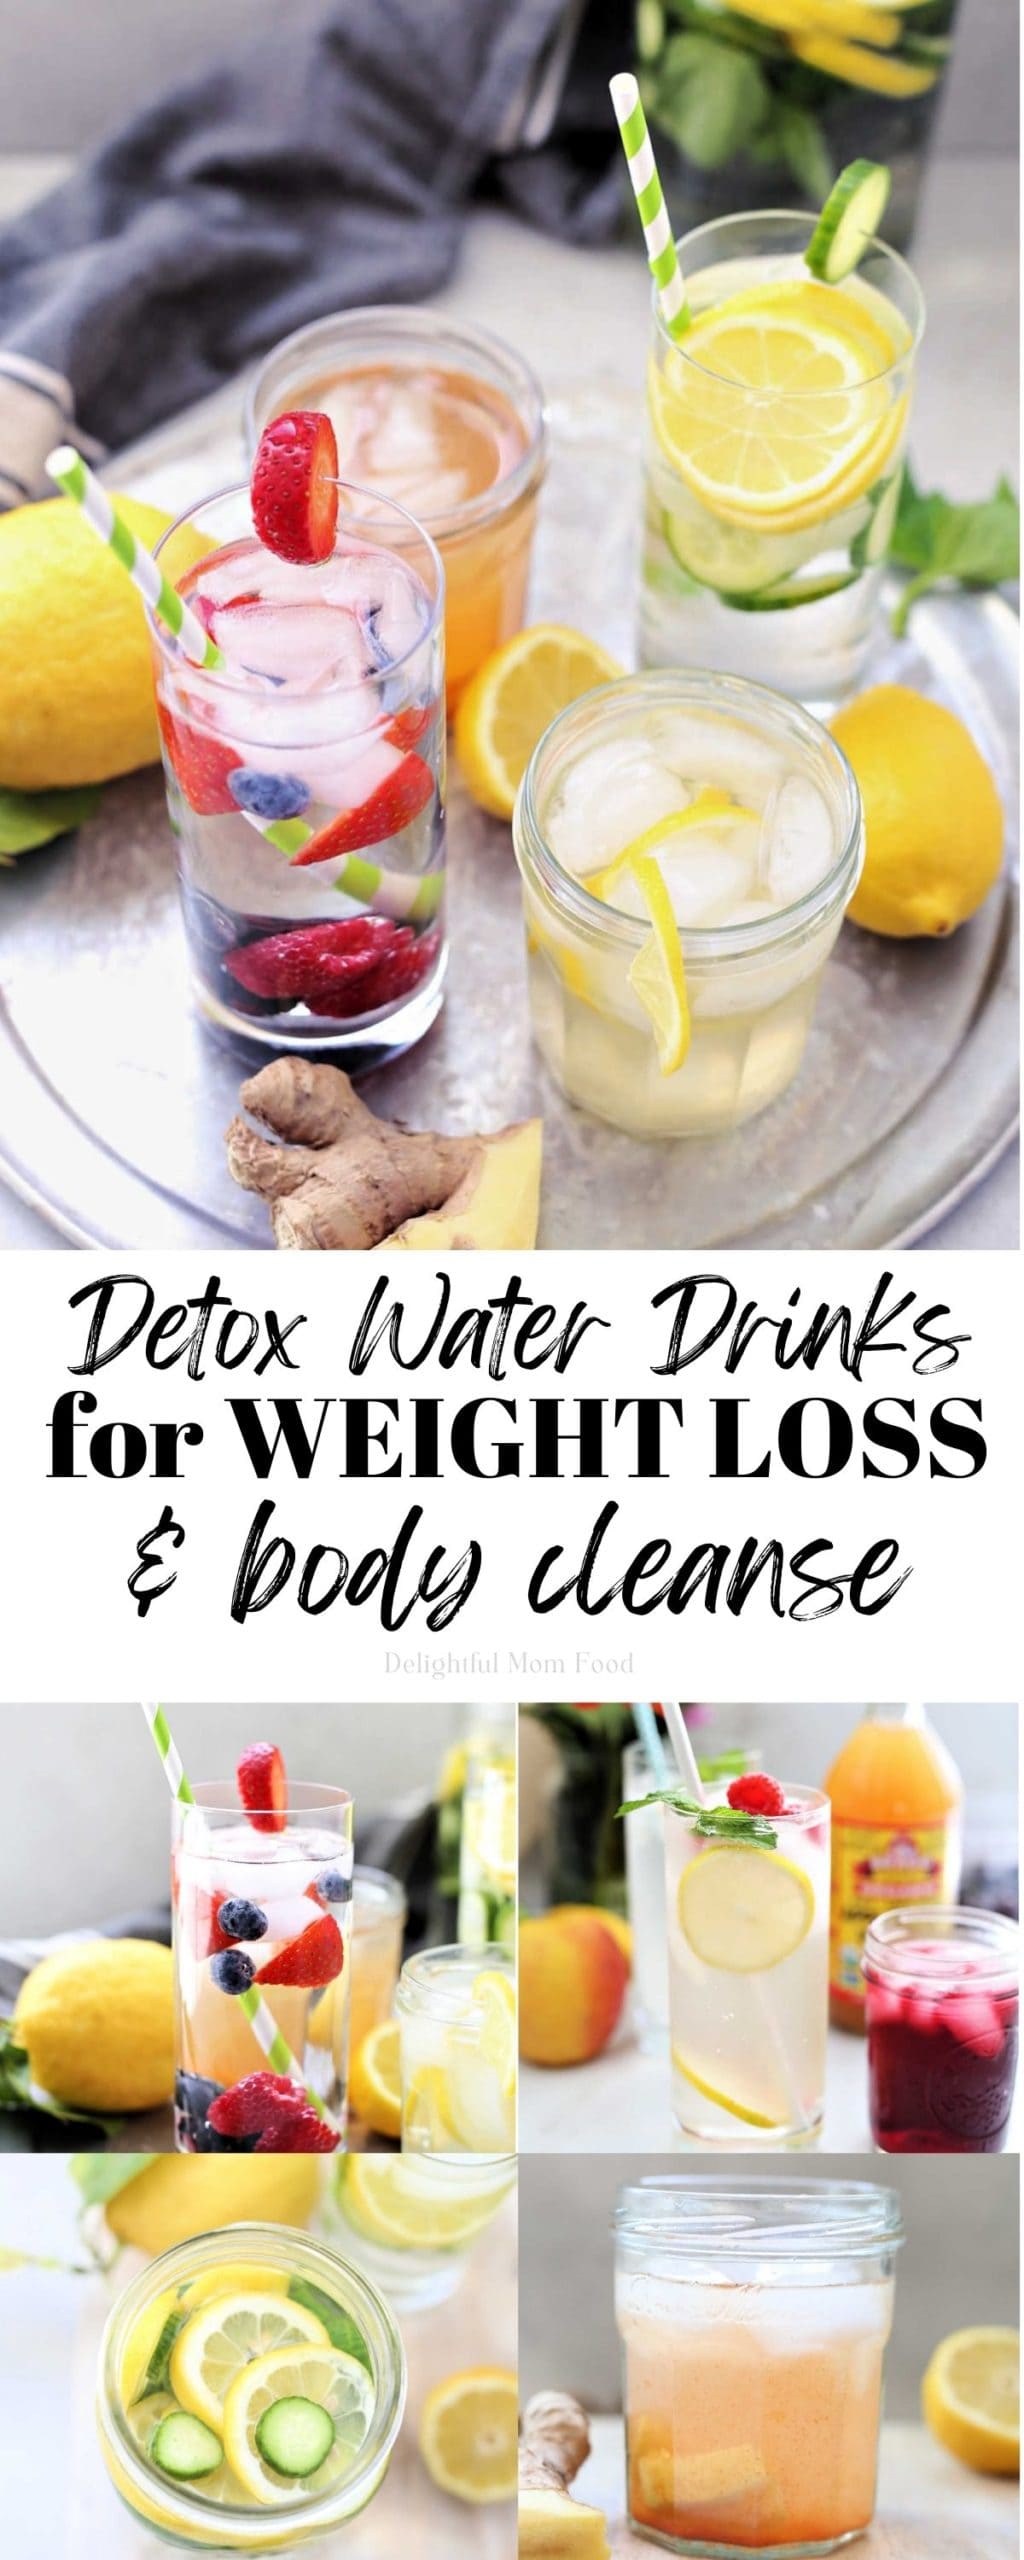 4 Detox Water Recipes for Weight Loss and Cleanse - DMF